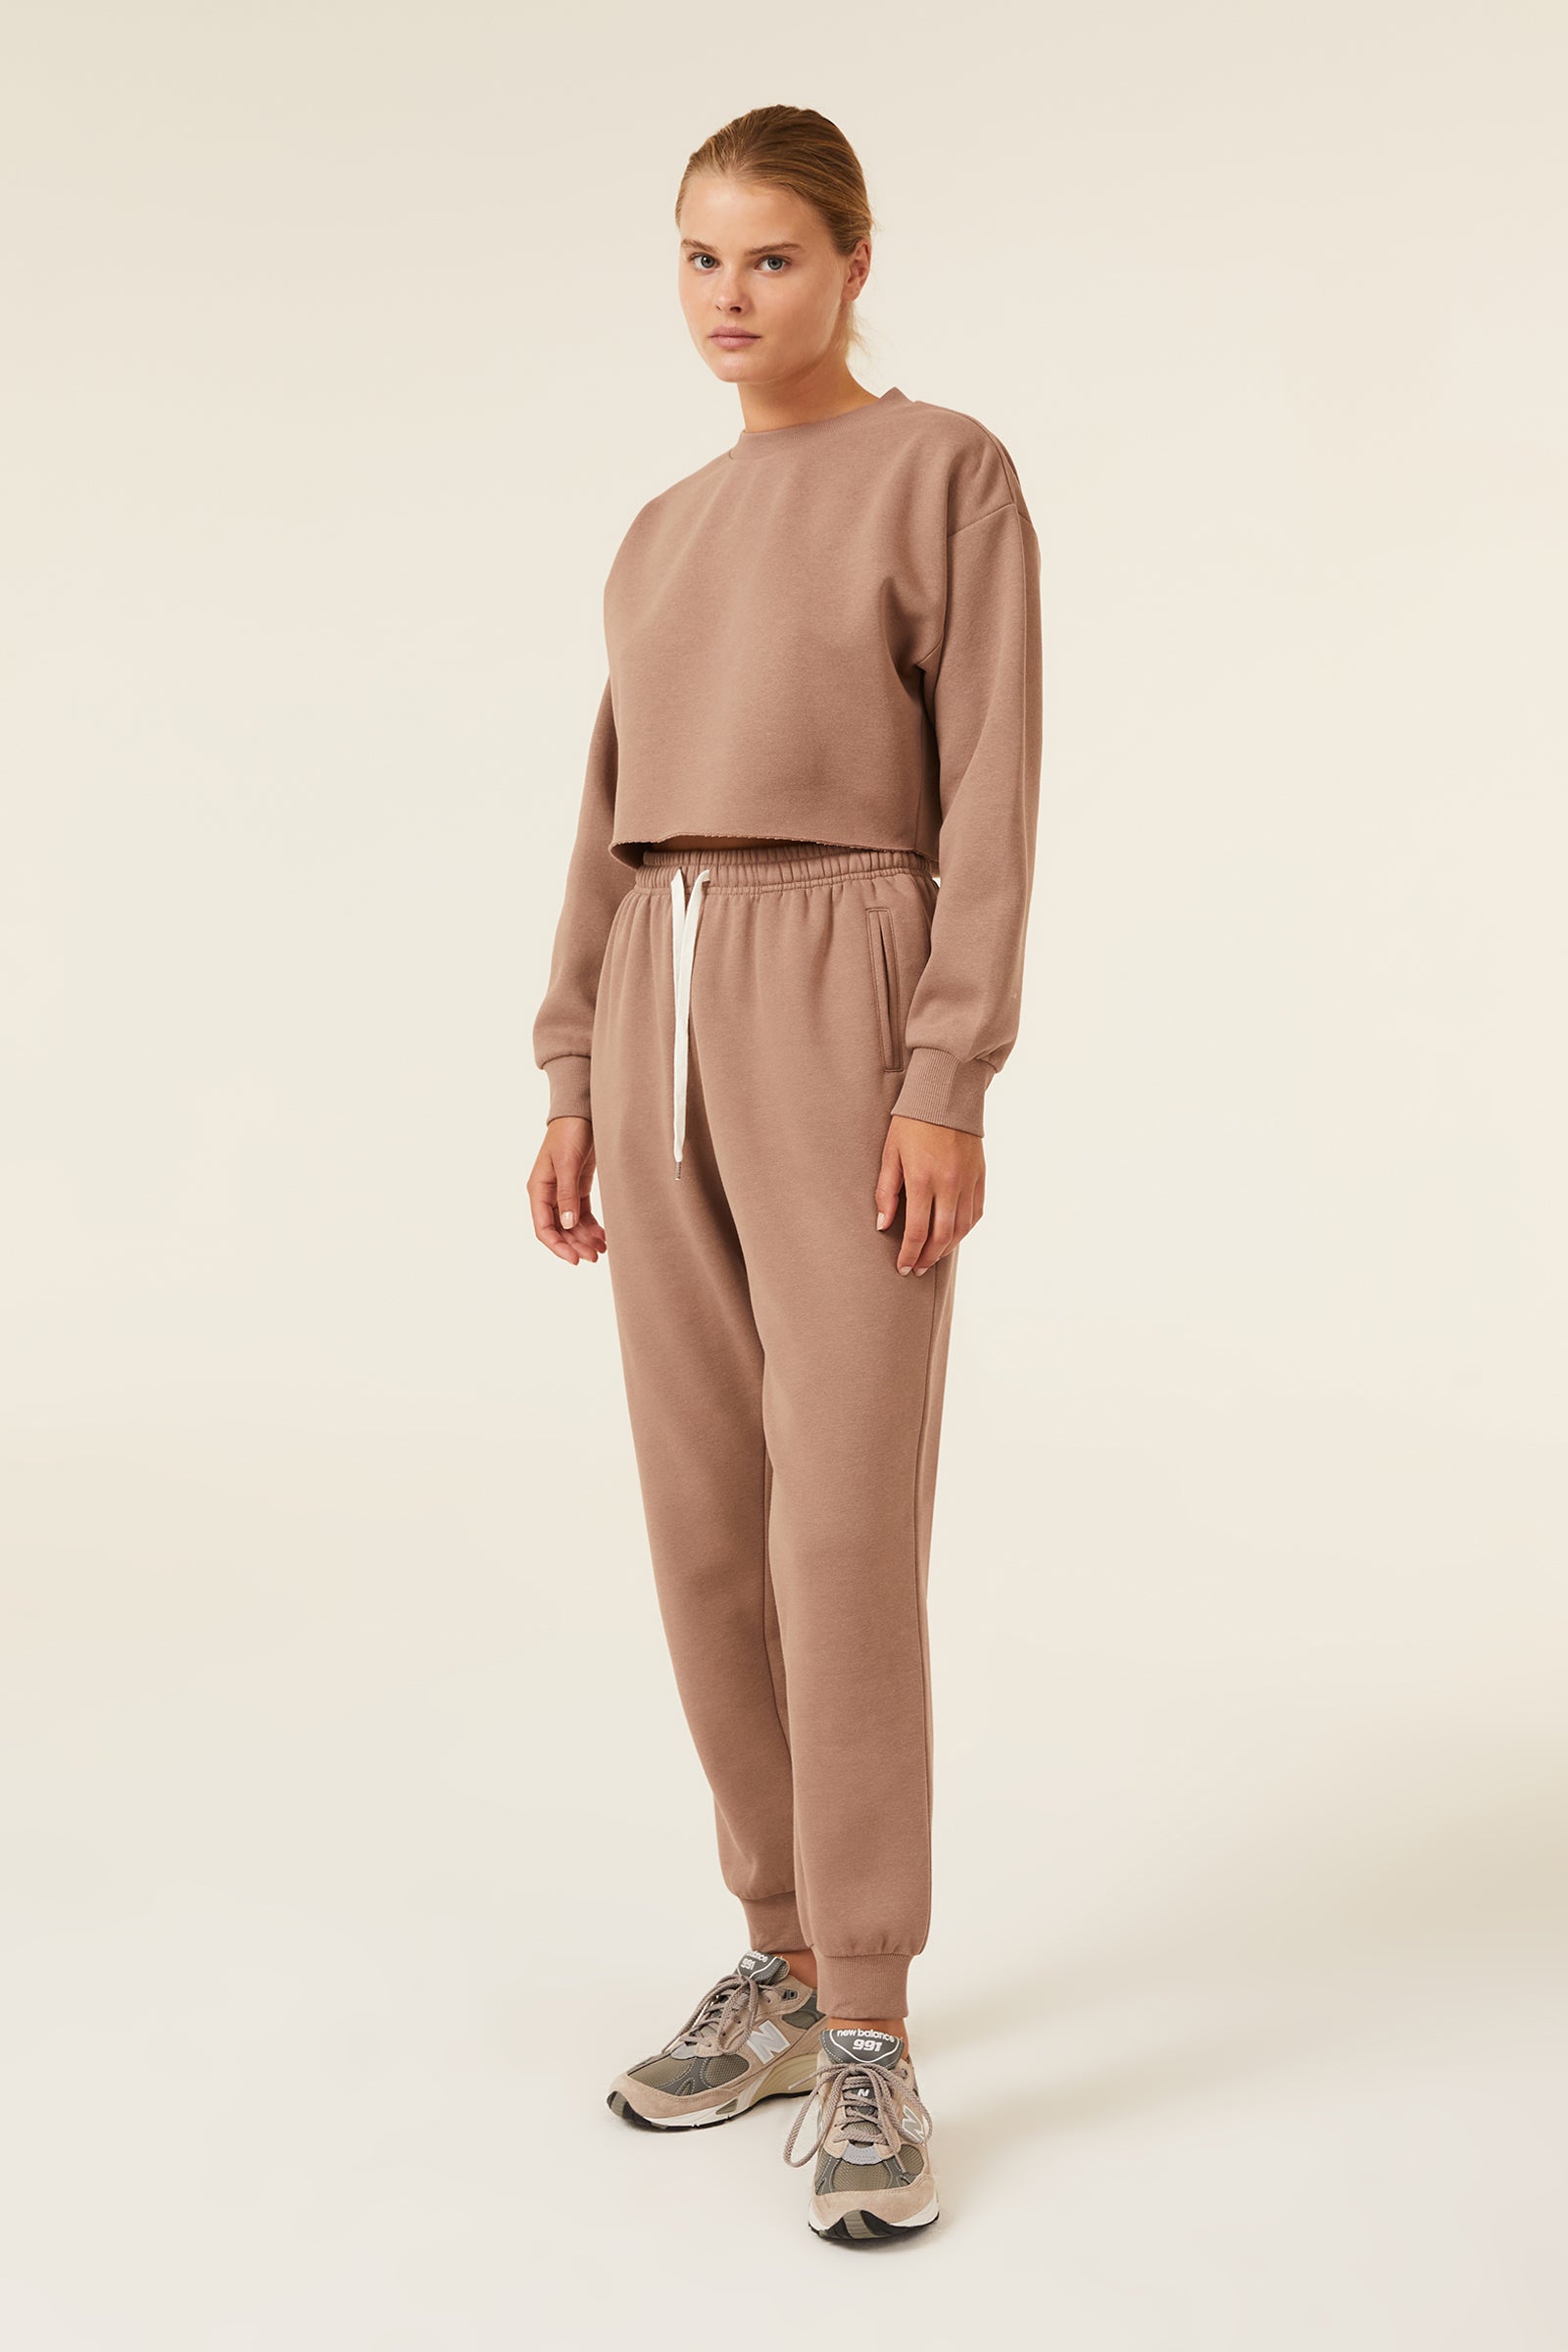 Nude Lucy Carter Classic Crop Sweat In A Brown Carob Colour 